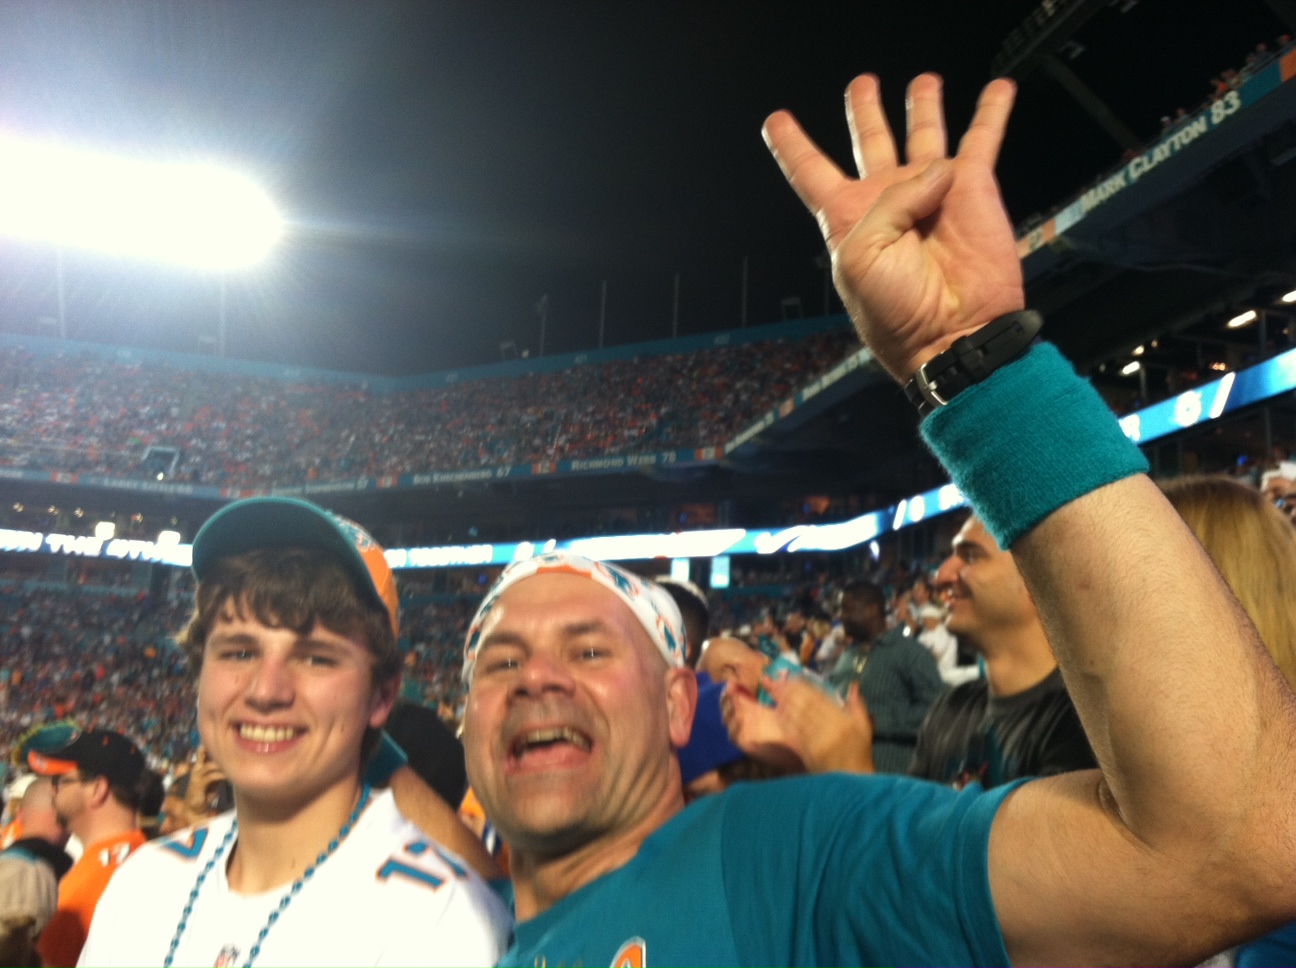 11-13-14 DOLPHINS score versus Buffalo--let the good times roll!